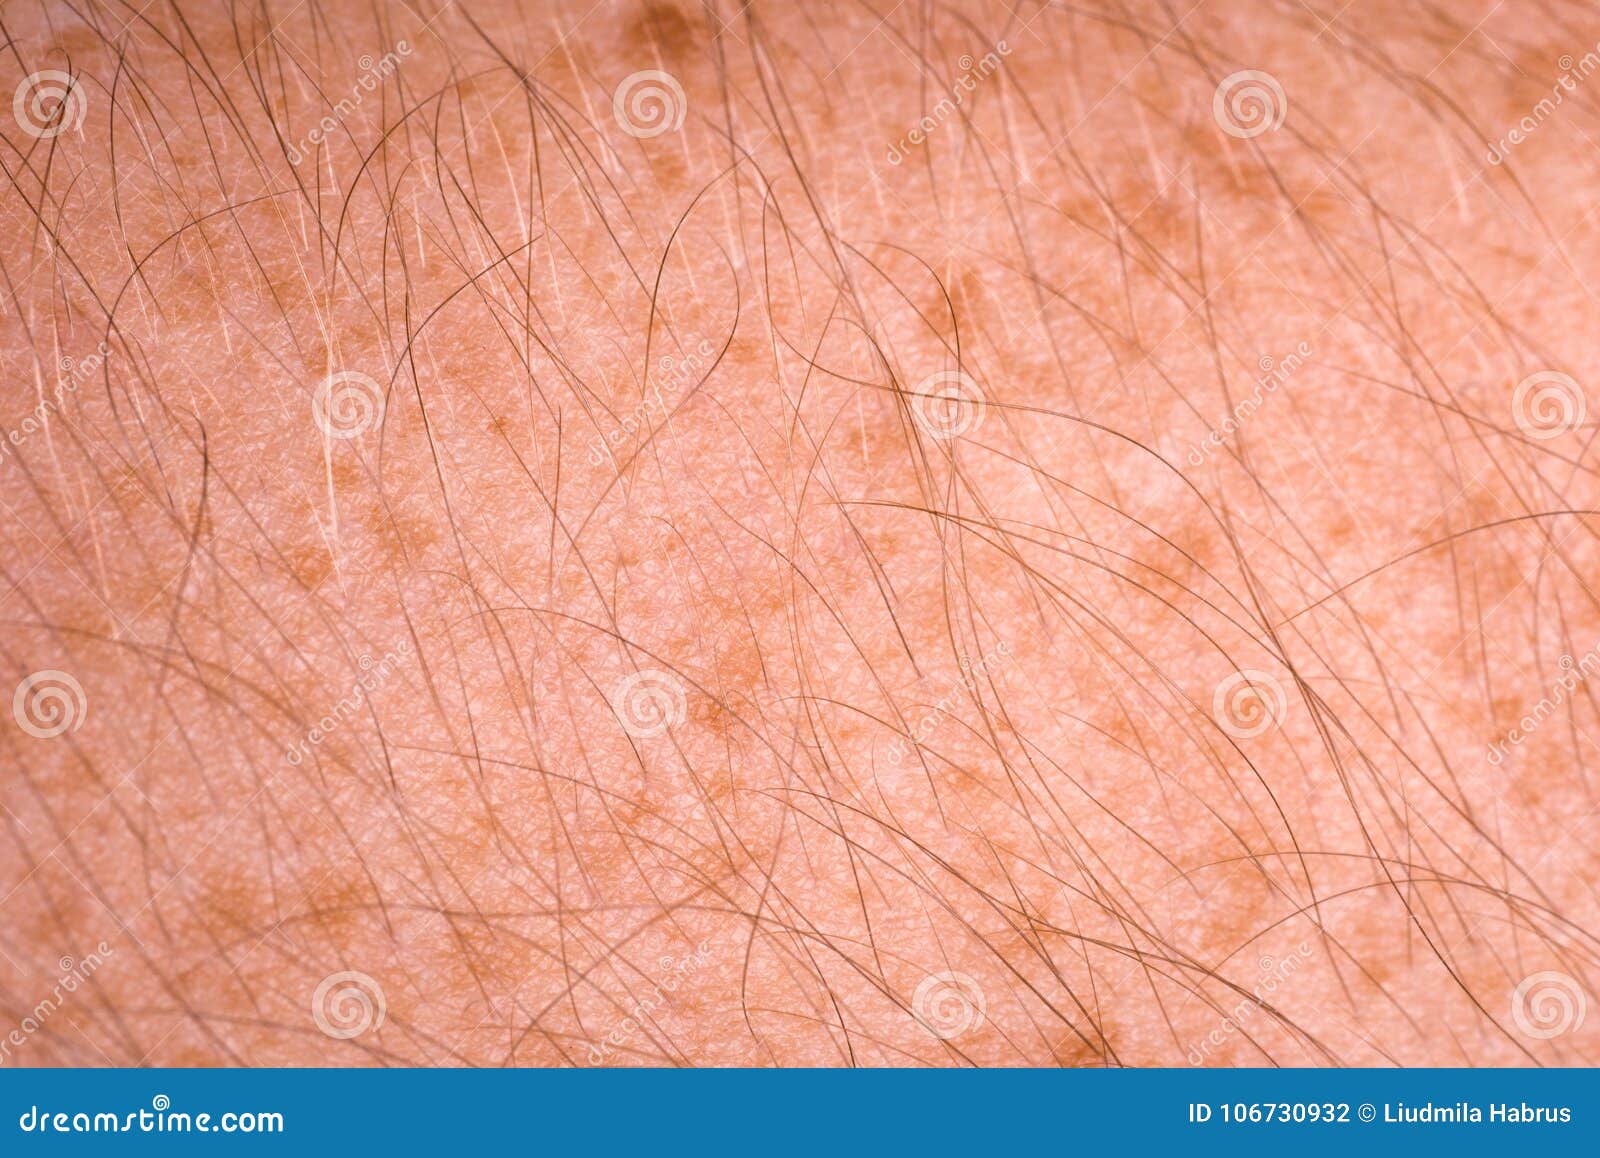 Dark Spots On Male Hairy Arm Stock Photo Image Of Cancer Closeup